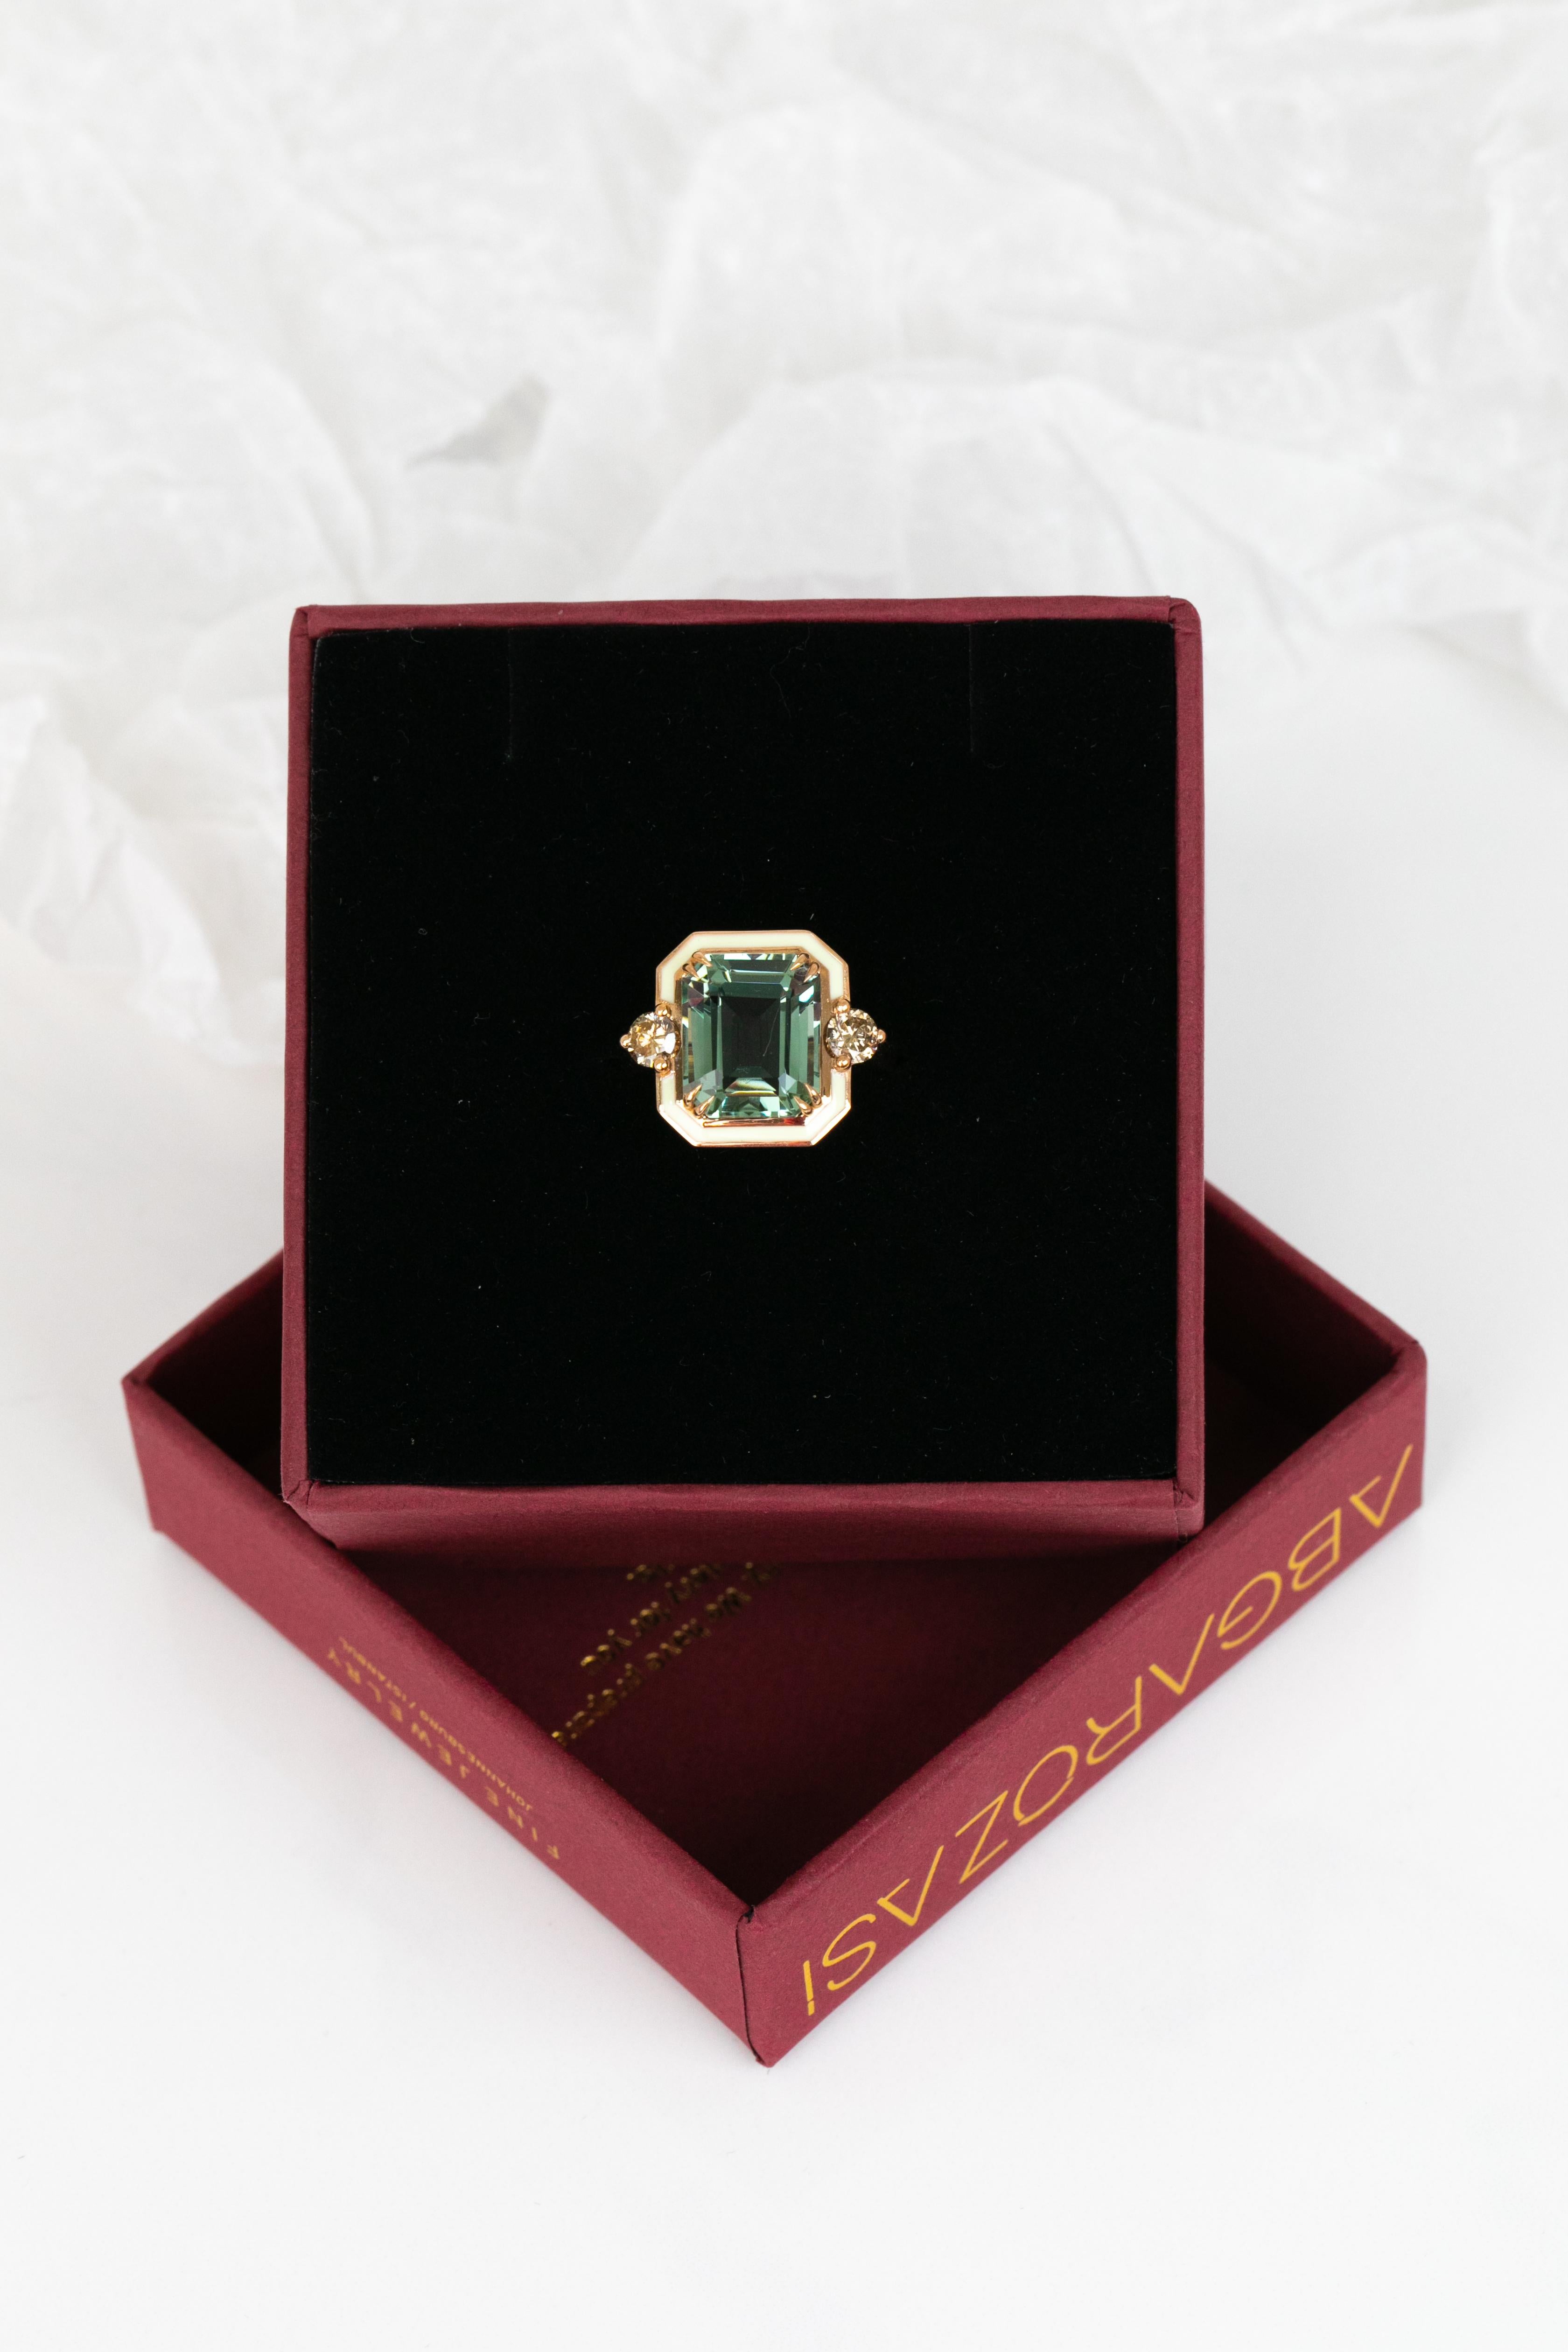 For Sale:  14k Gold Art Deco Ring, 5.67ct Green Amethyst Ring and 0.54 Cognac Diamond Ring 6